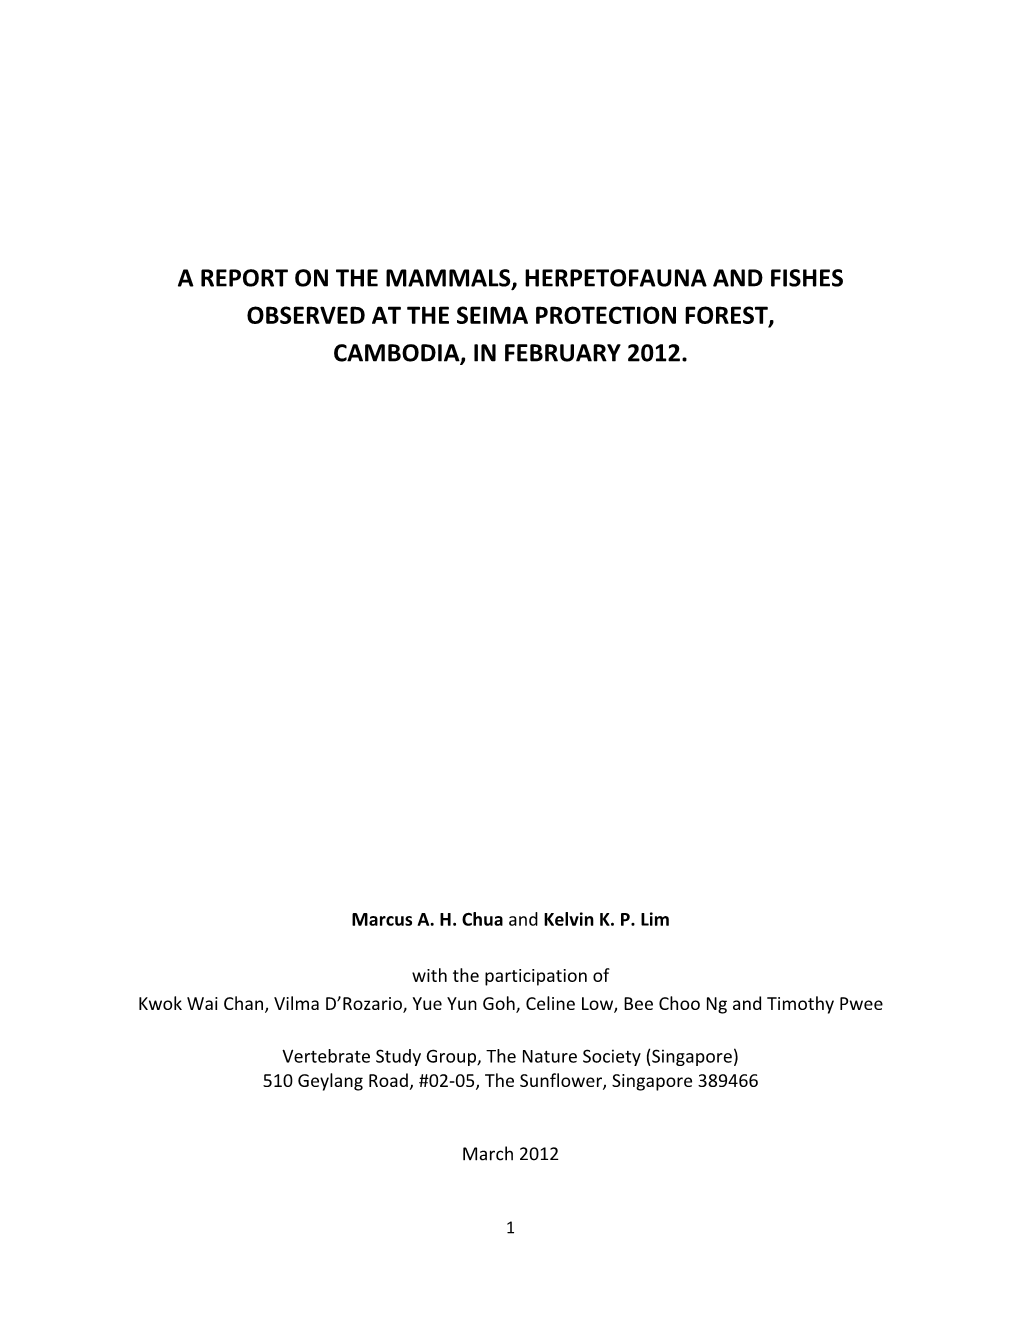 A Report on the Mammals, Herpetofauna and Fishes Observed at the Seima Protection Forest, Cambodia, in February 2012